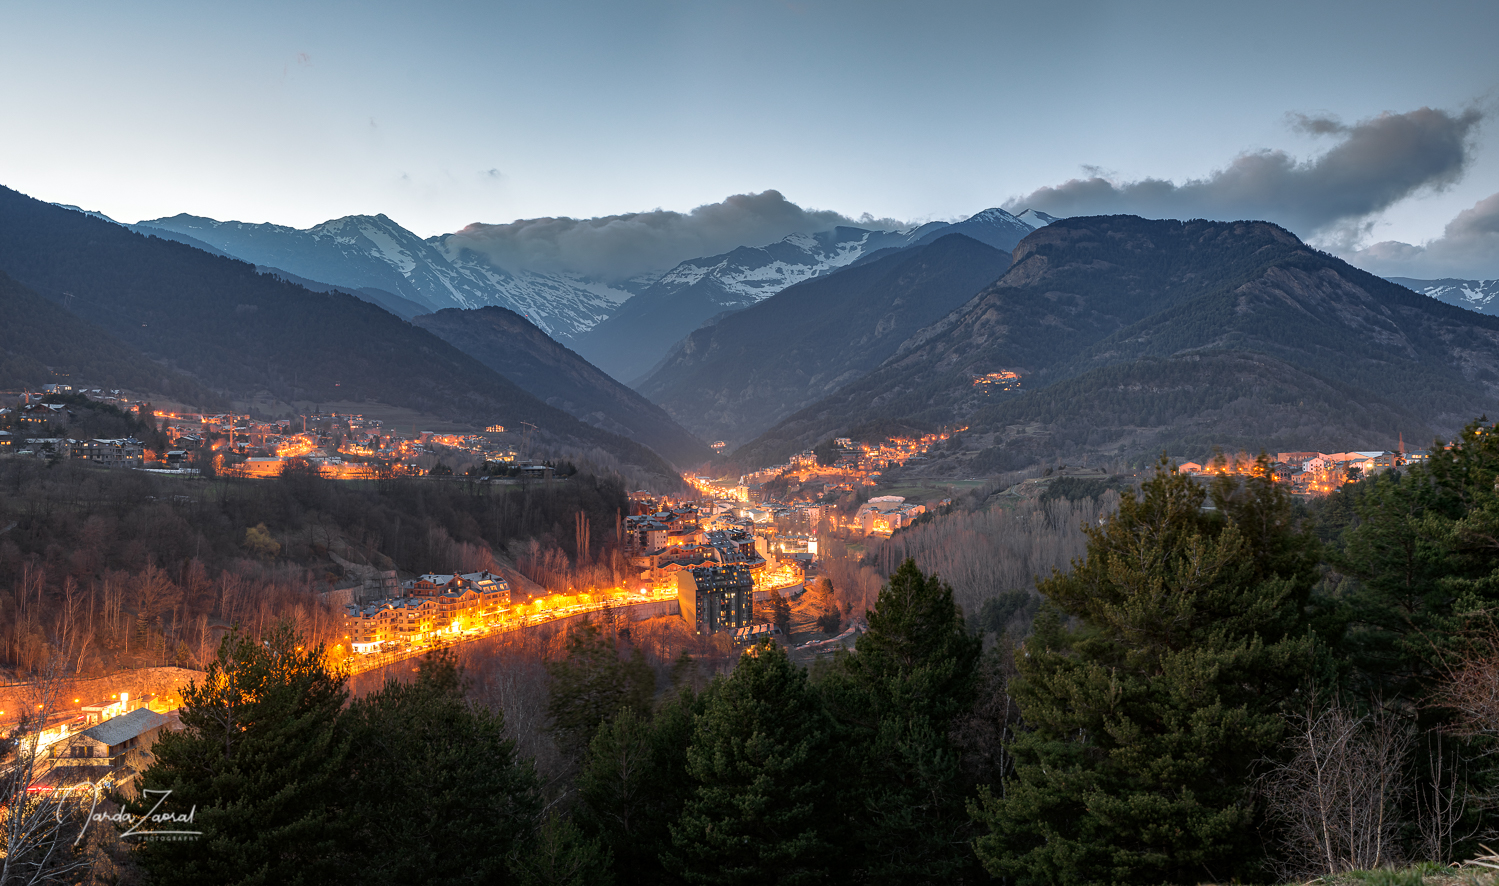 View over Coma Pedrosa from La Massana after sunset